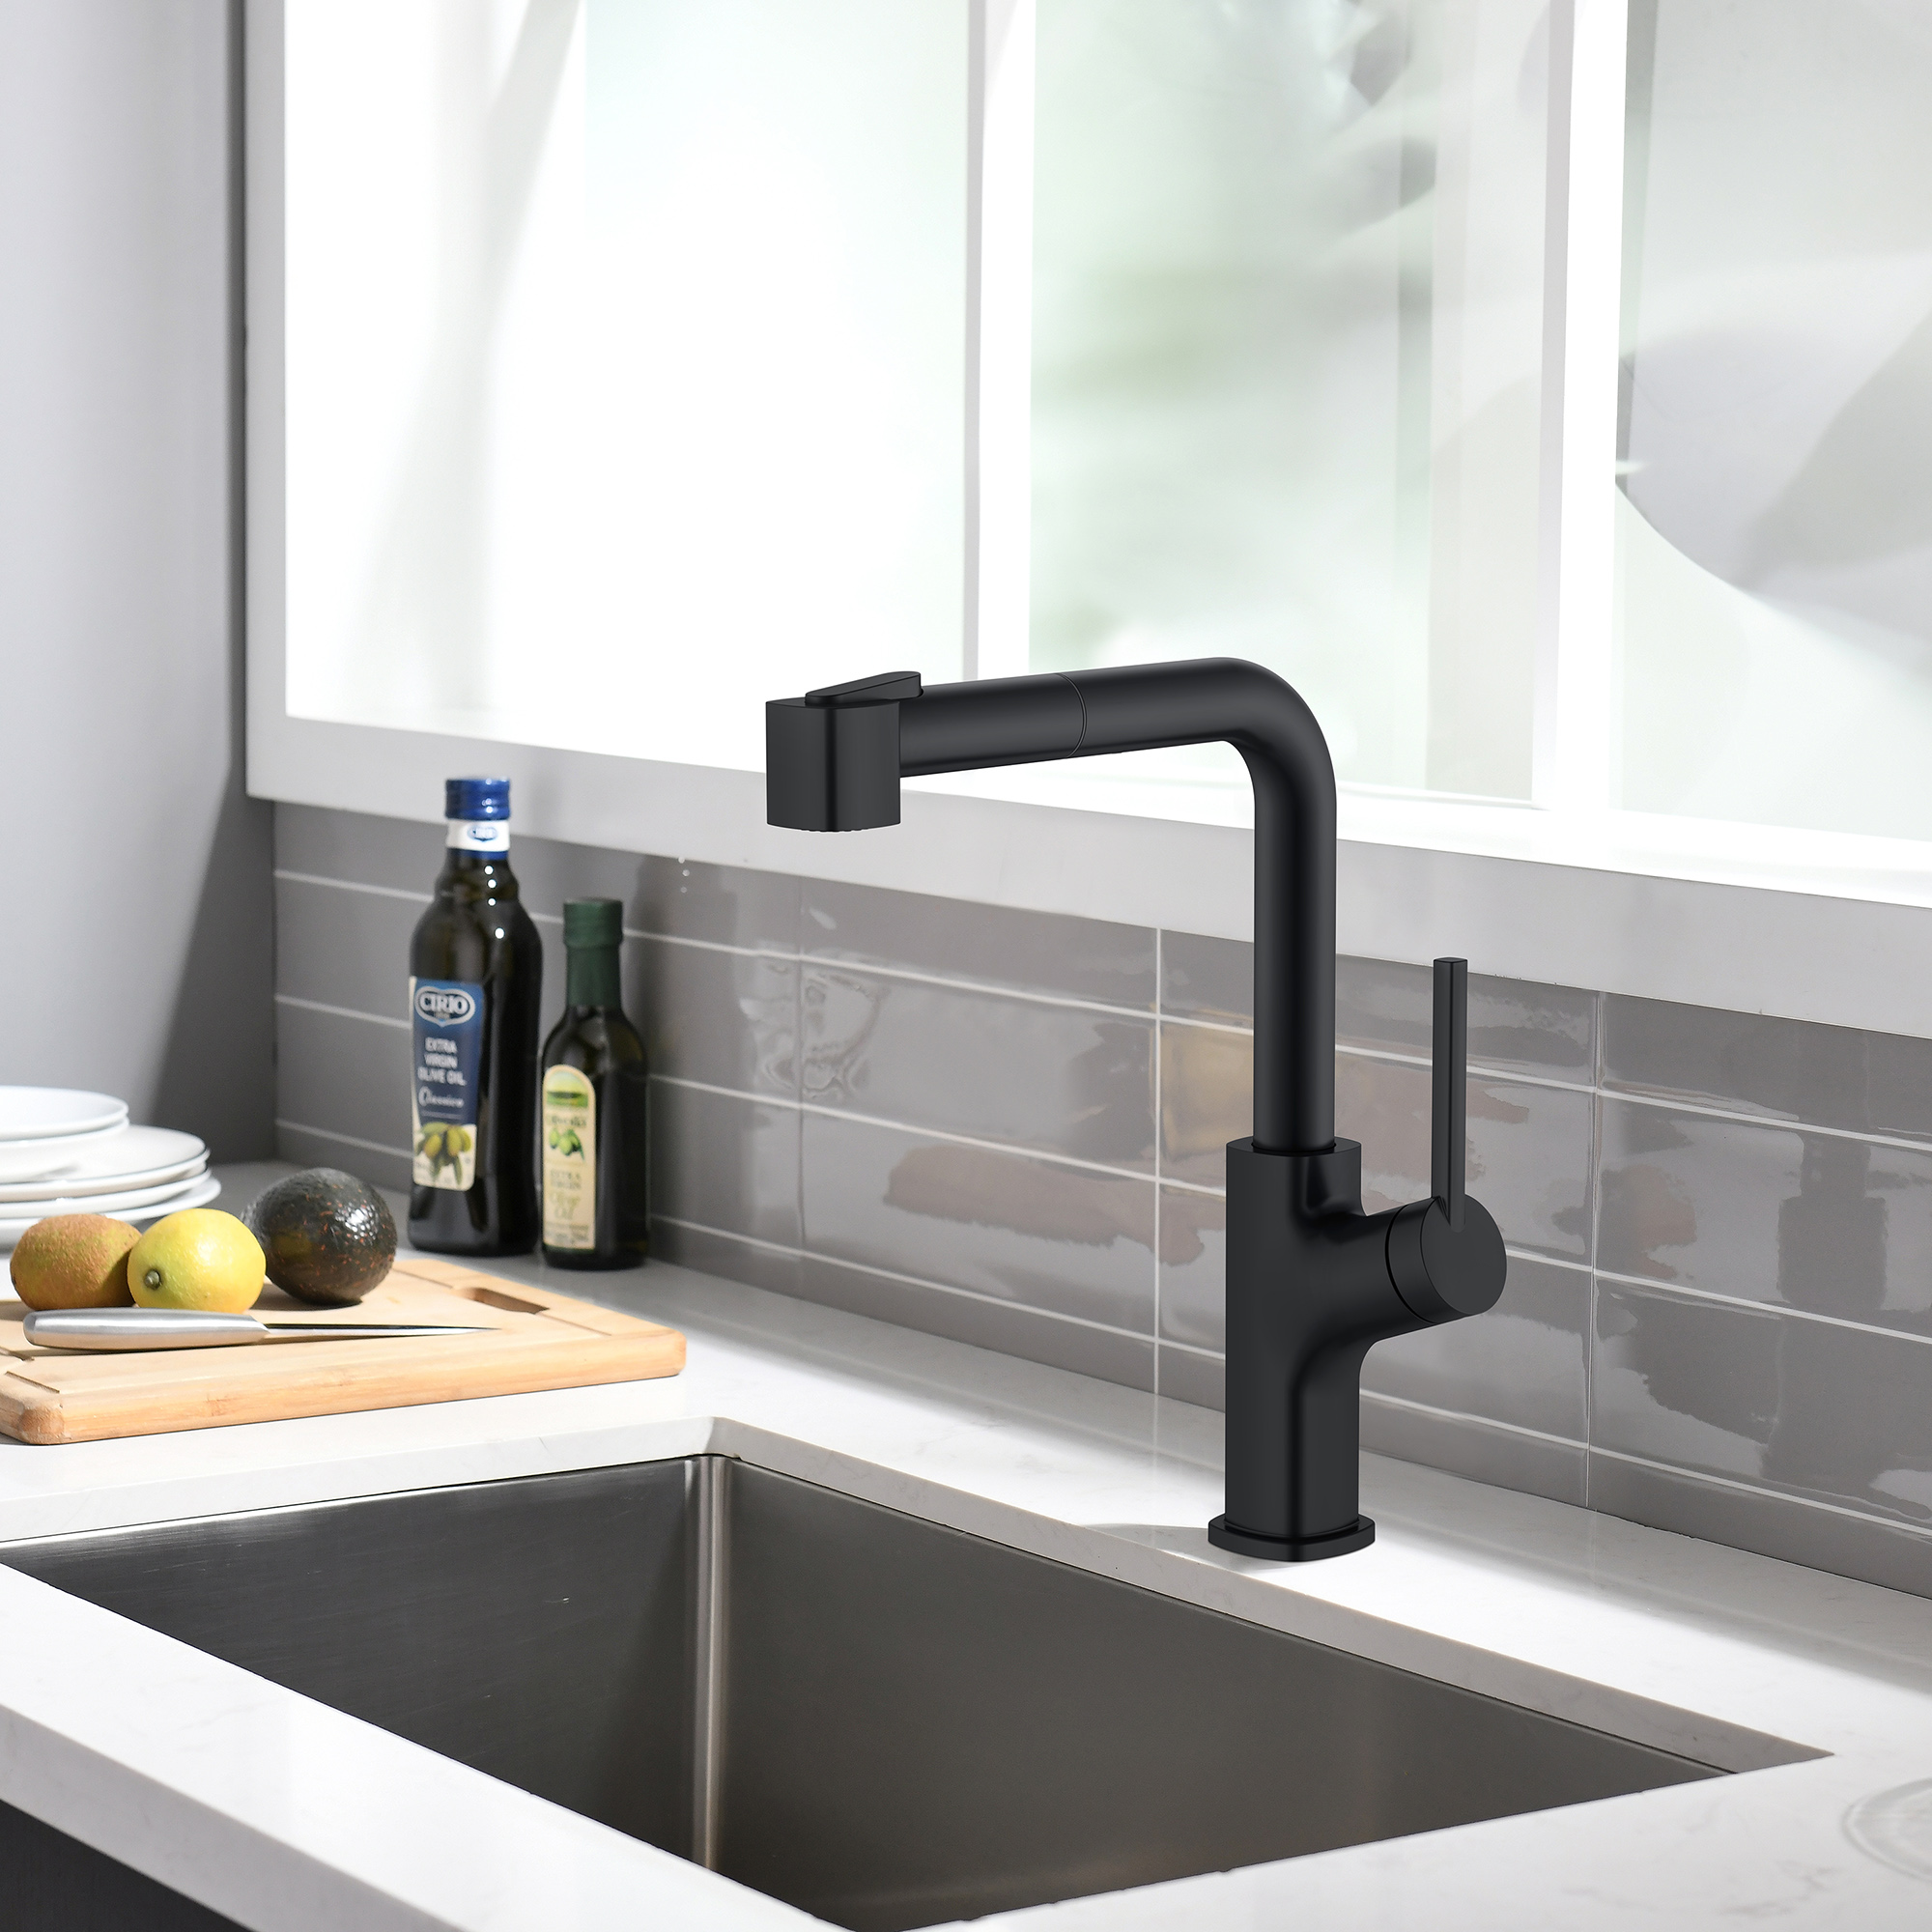 Choose the right faucet for your kitchen:Gold/Brushed Nickel/Modern Kitchen Faucet